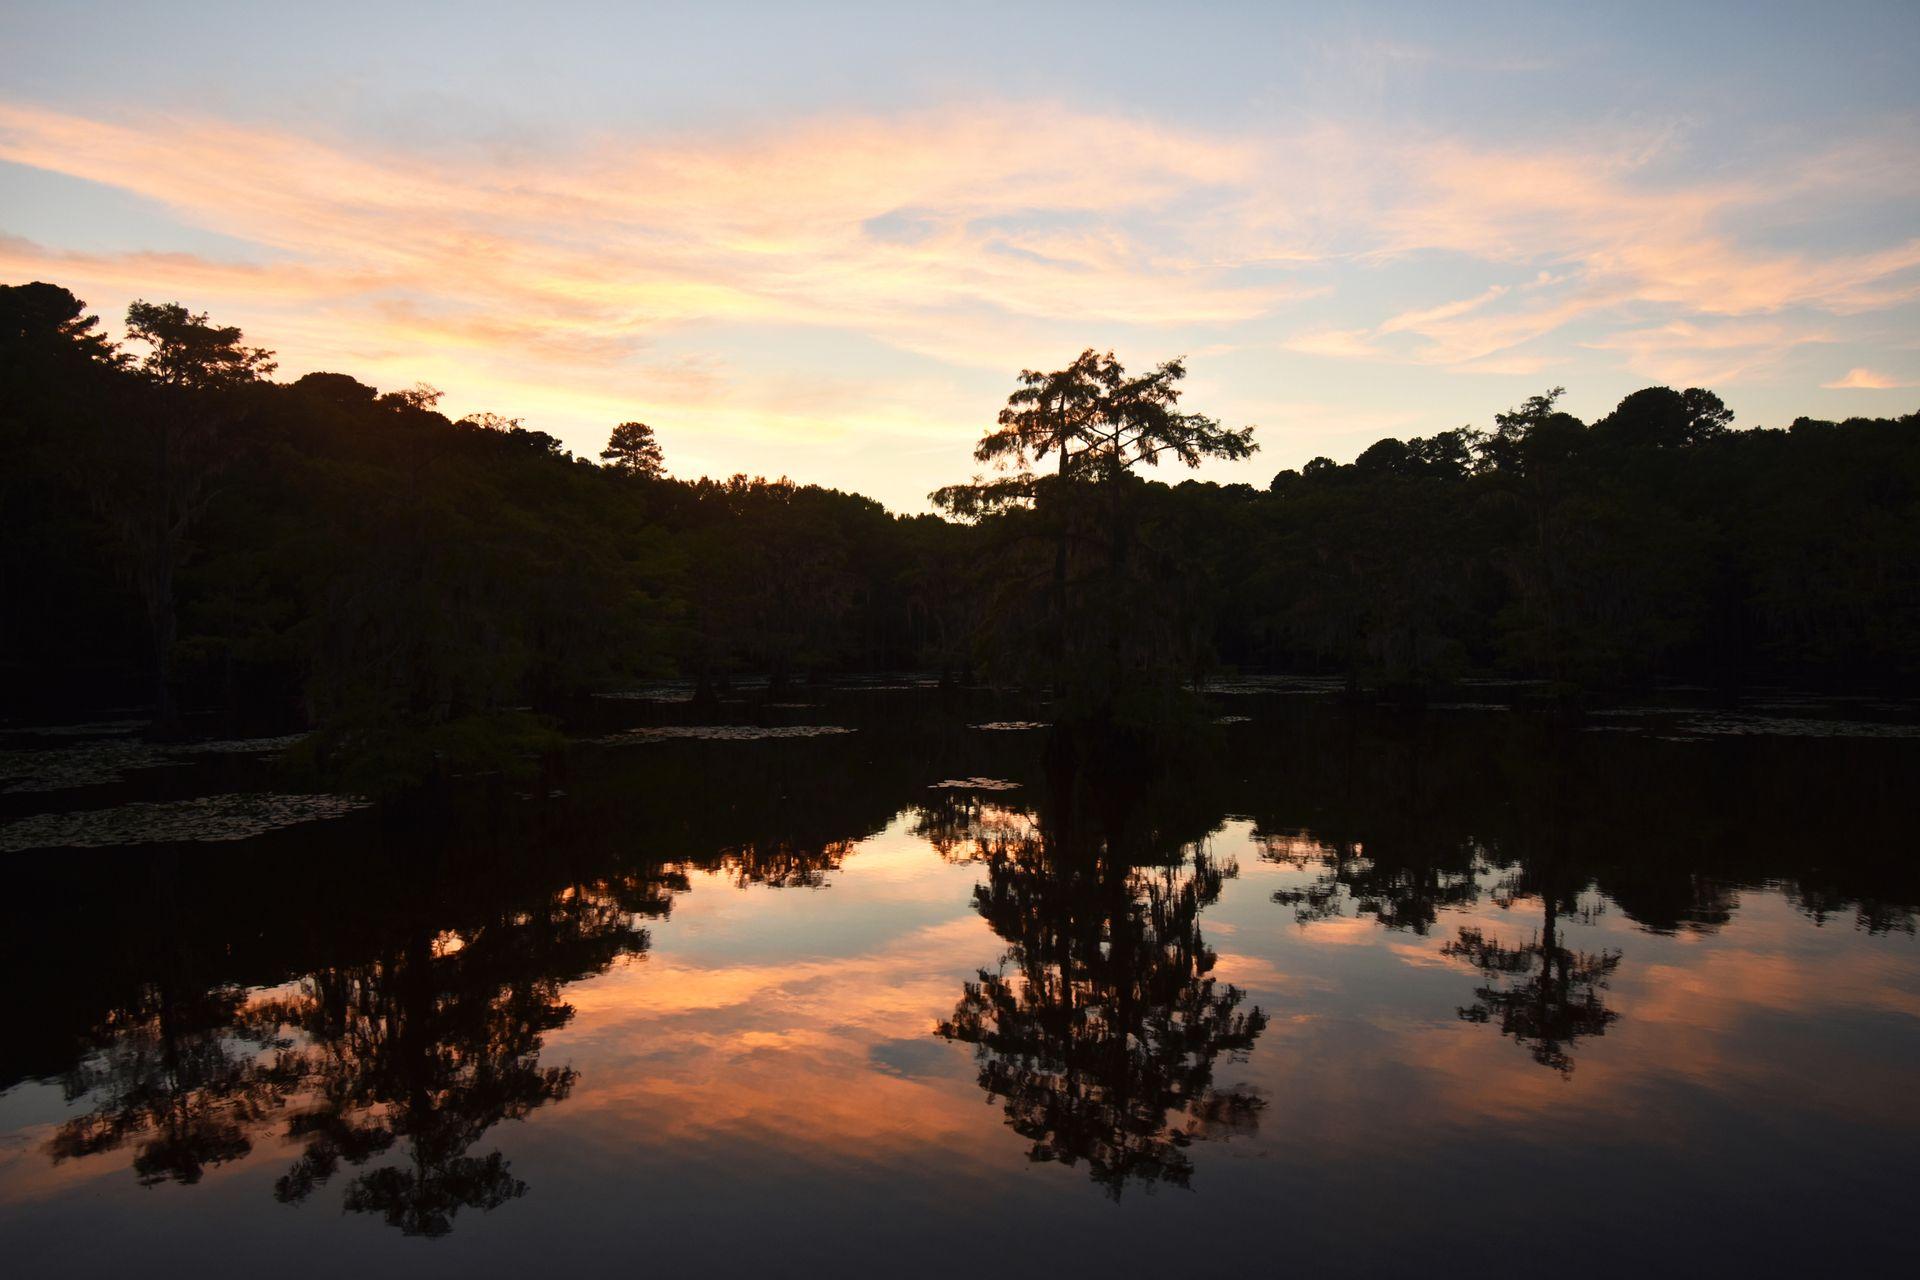 A colorful sunset reflects onto the water at Caddo Lake. A silhouette of trees is in the shadows.